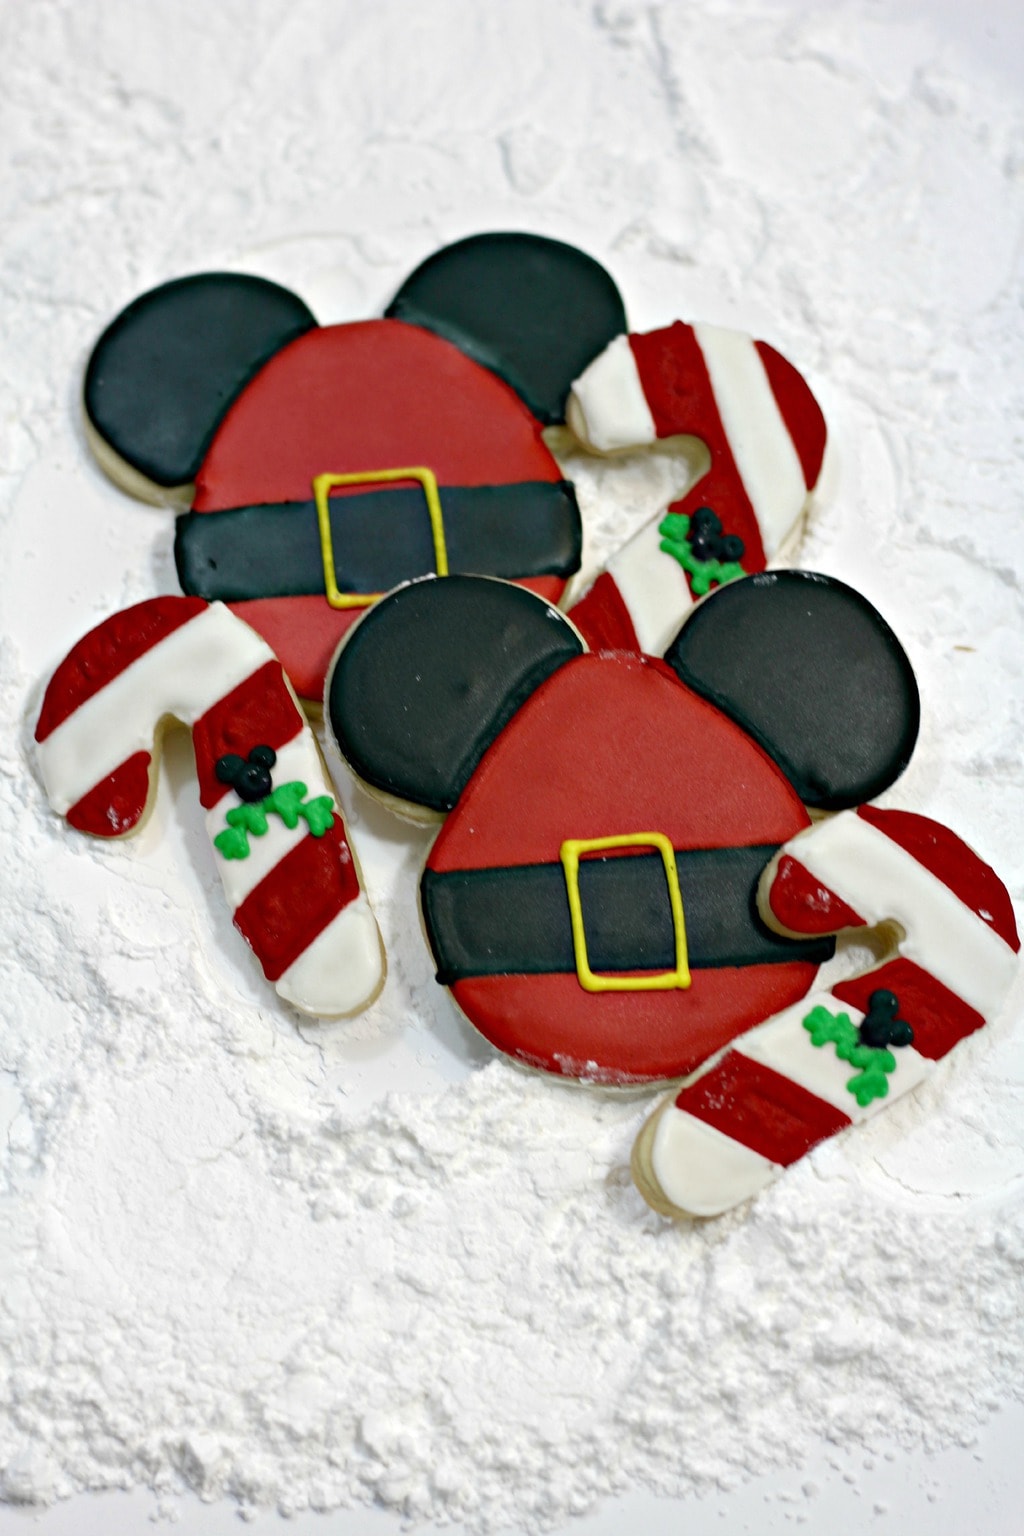 Cookies decorated like Santa Mickey Mouse